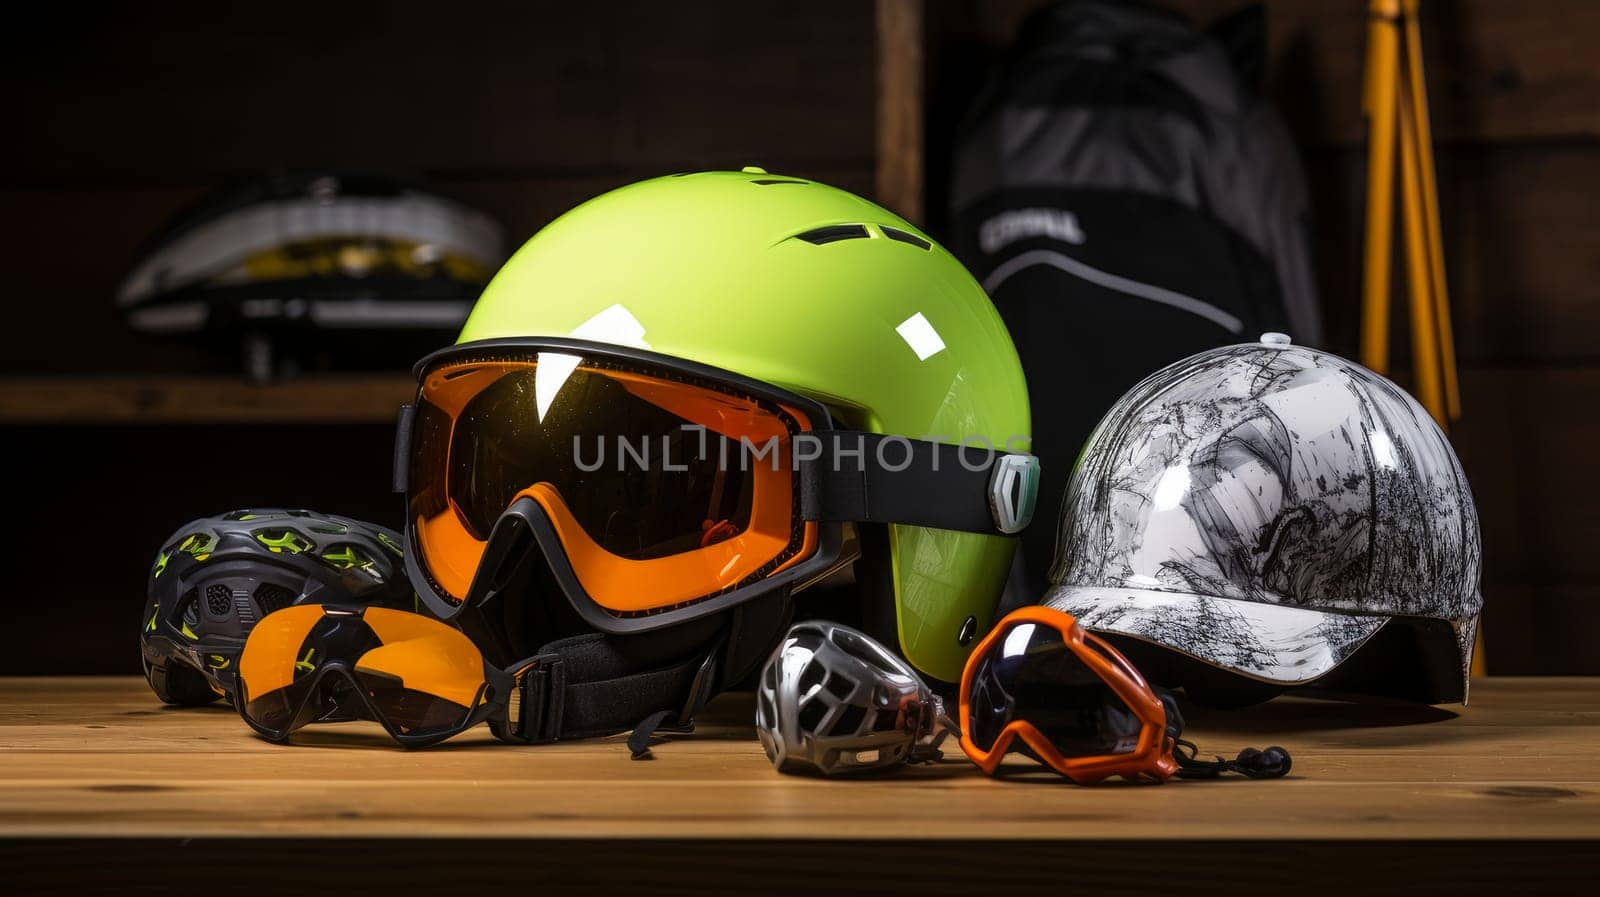 Ski equipment on a wooden surface, extreme sports, during vacation and winter holidays. Concept of traveling around the world, recreation, winter sports, vacations, tourism in the mountains and unusual places.